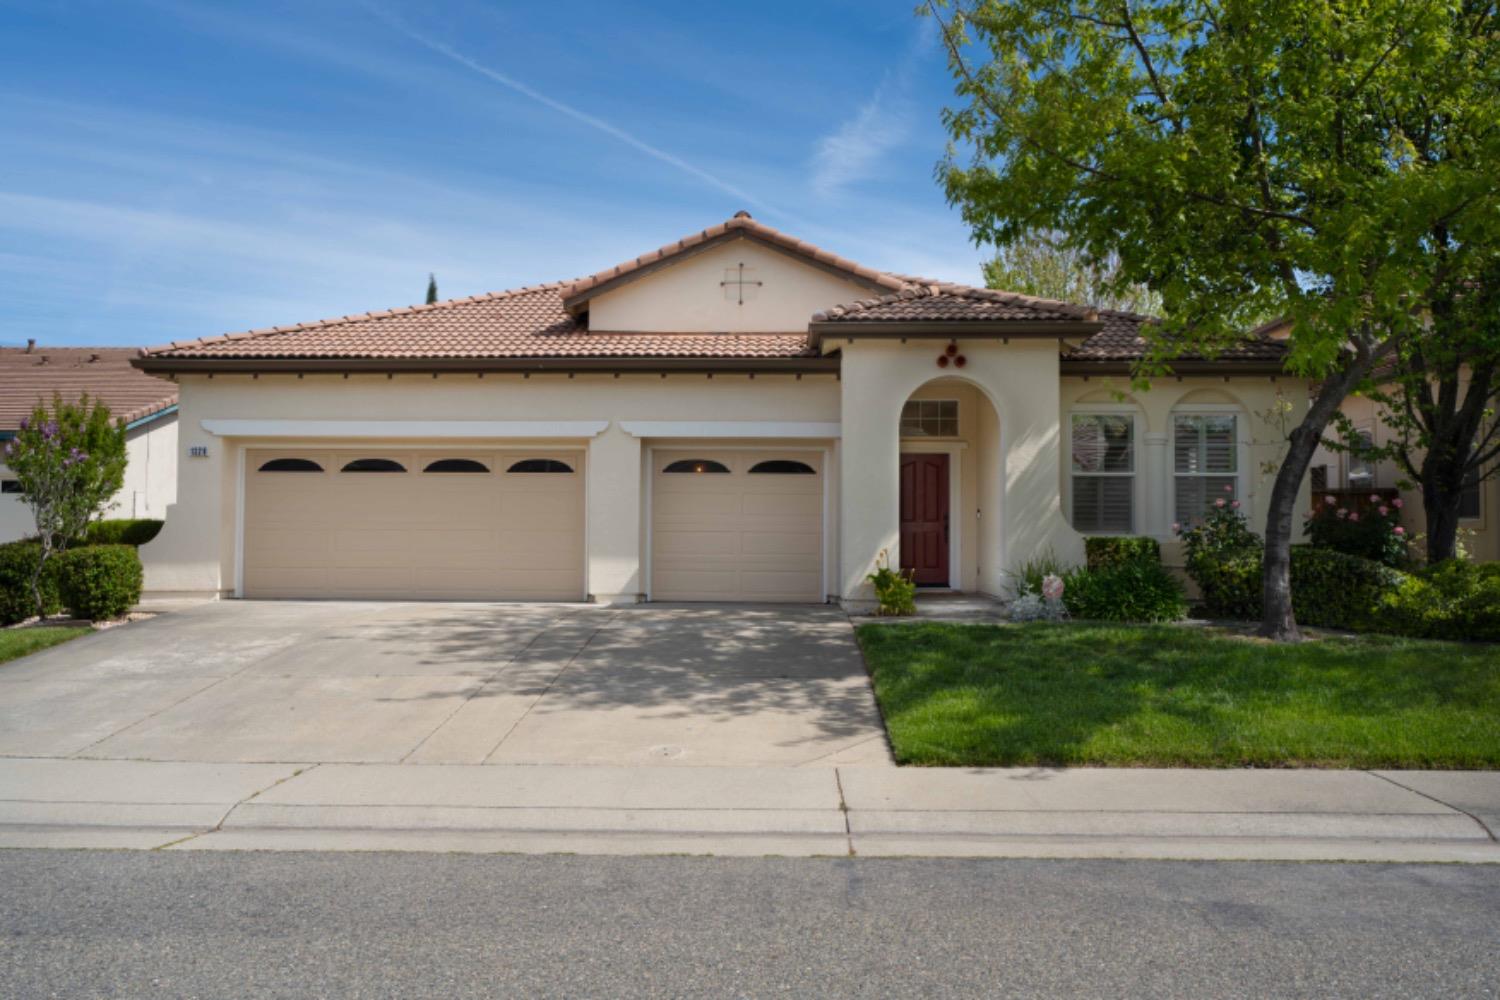 Photo of 1328 Crystal Hollow Ct in Lincoln, CA